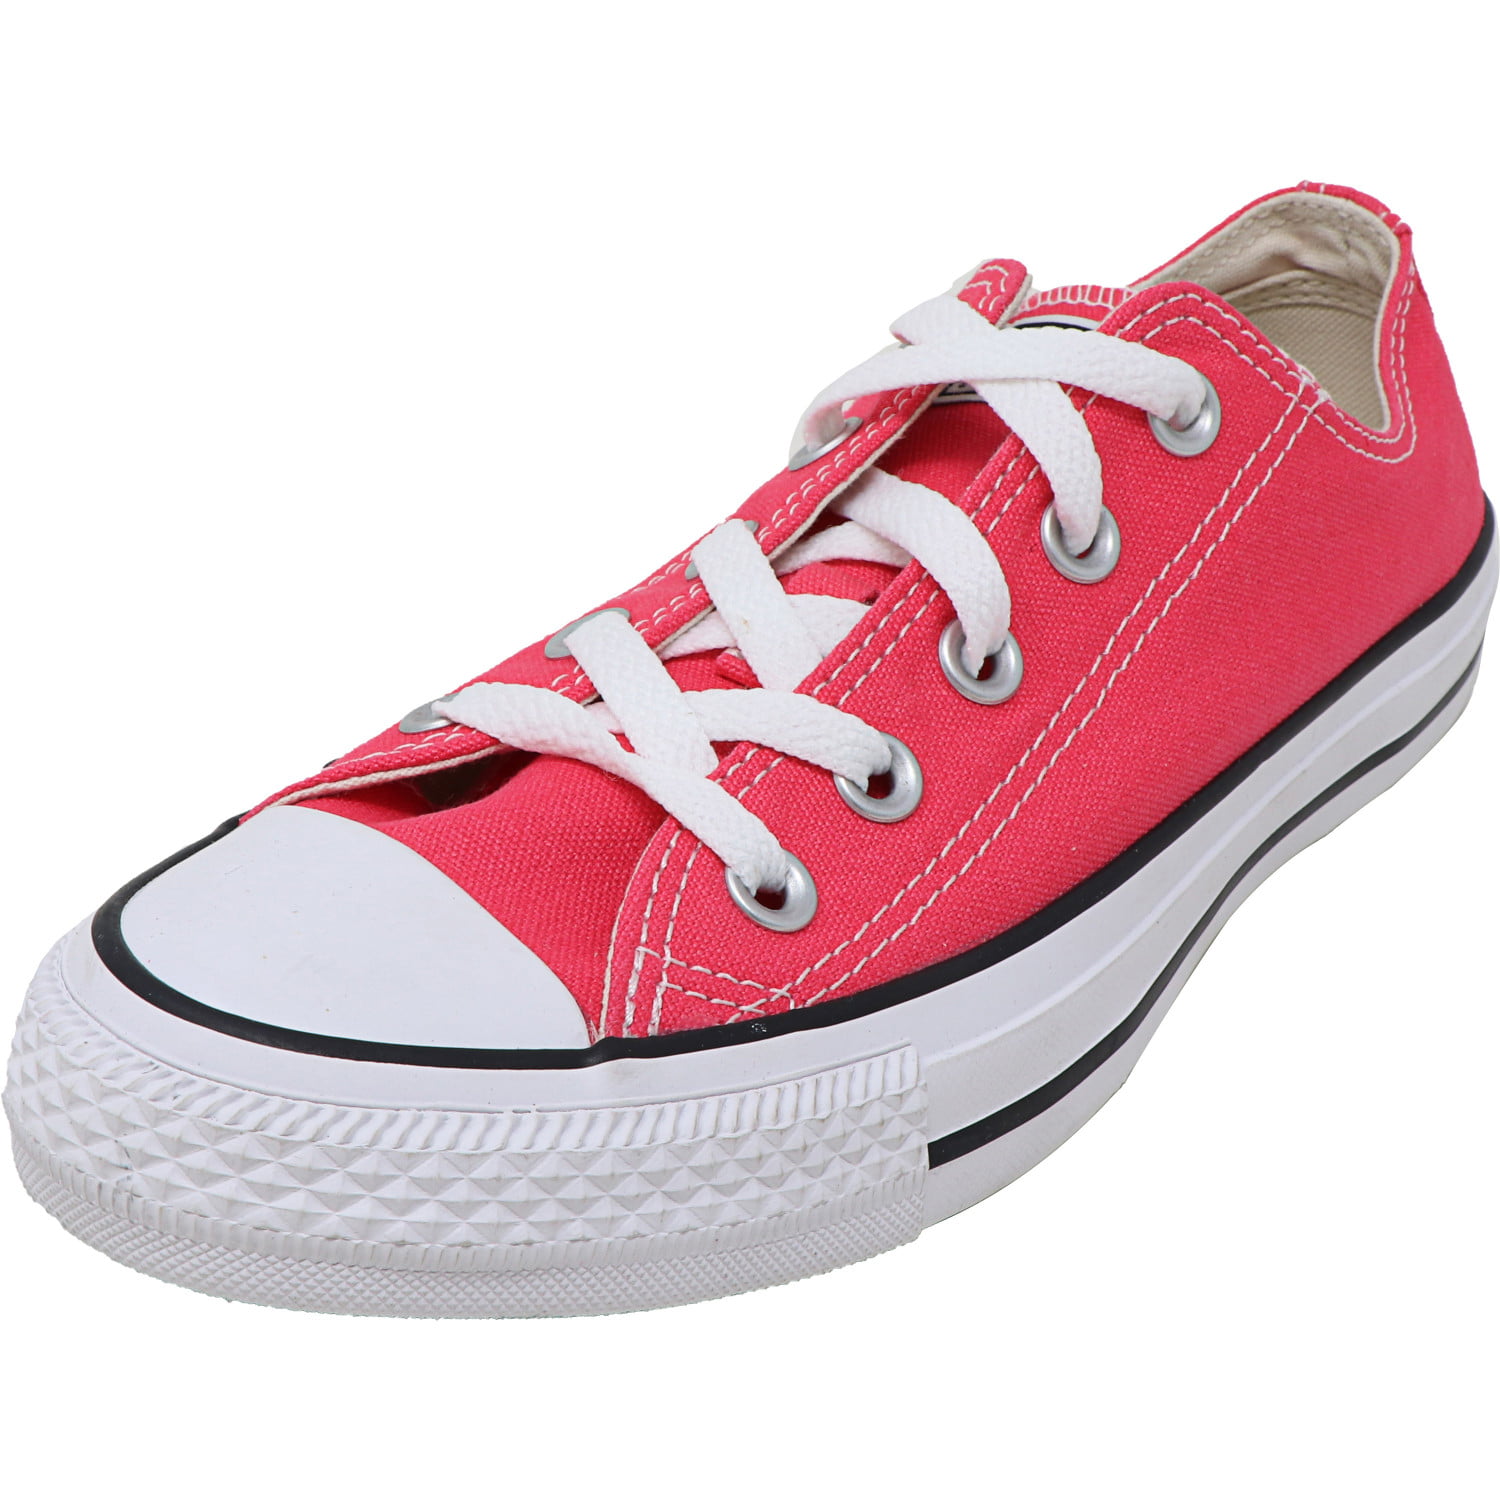 converse chuck taylor all star ox jelly low sneaker